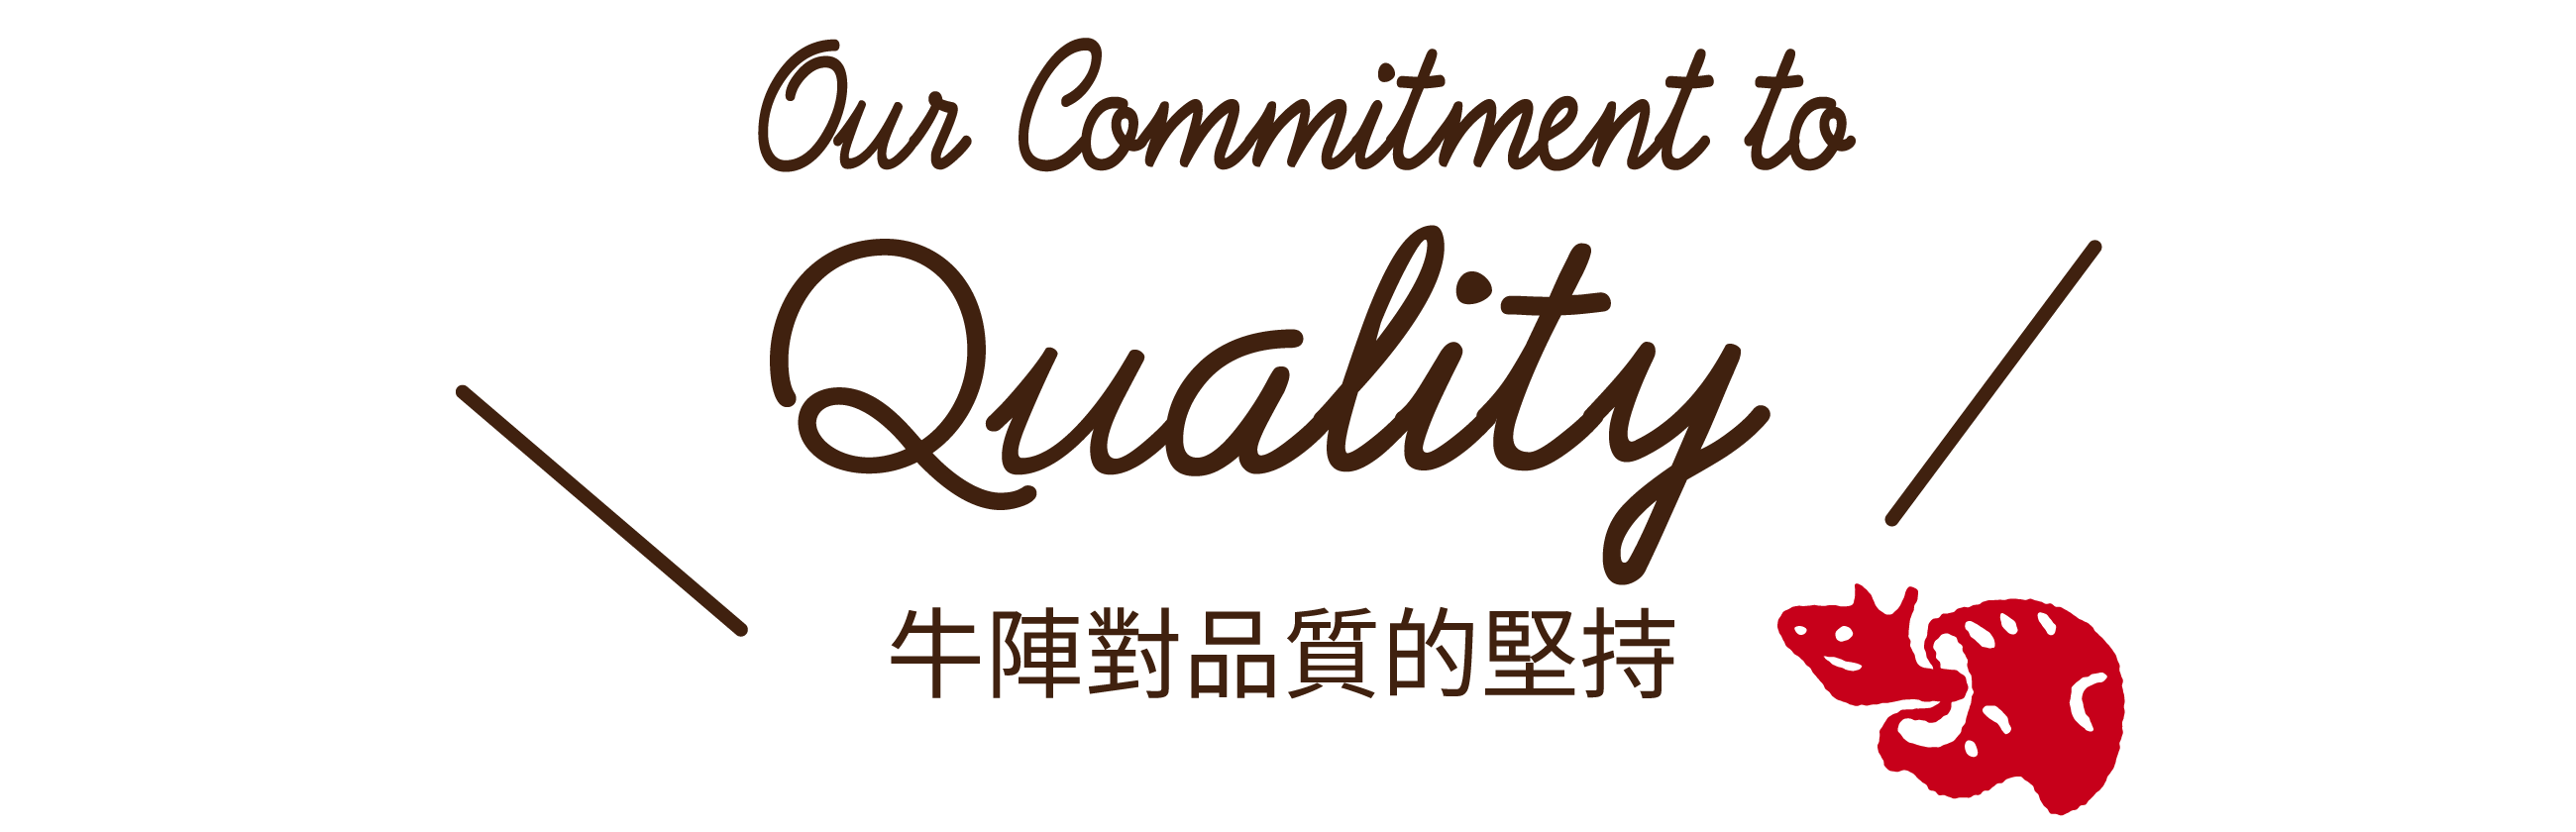 Our Commitment to Quality 牛陣對品質的堅持